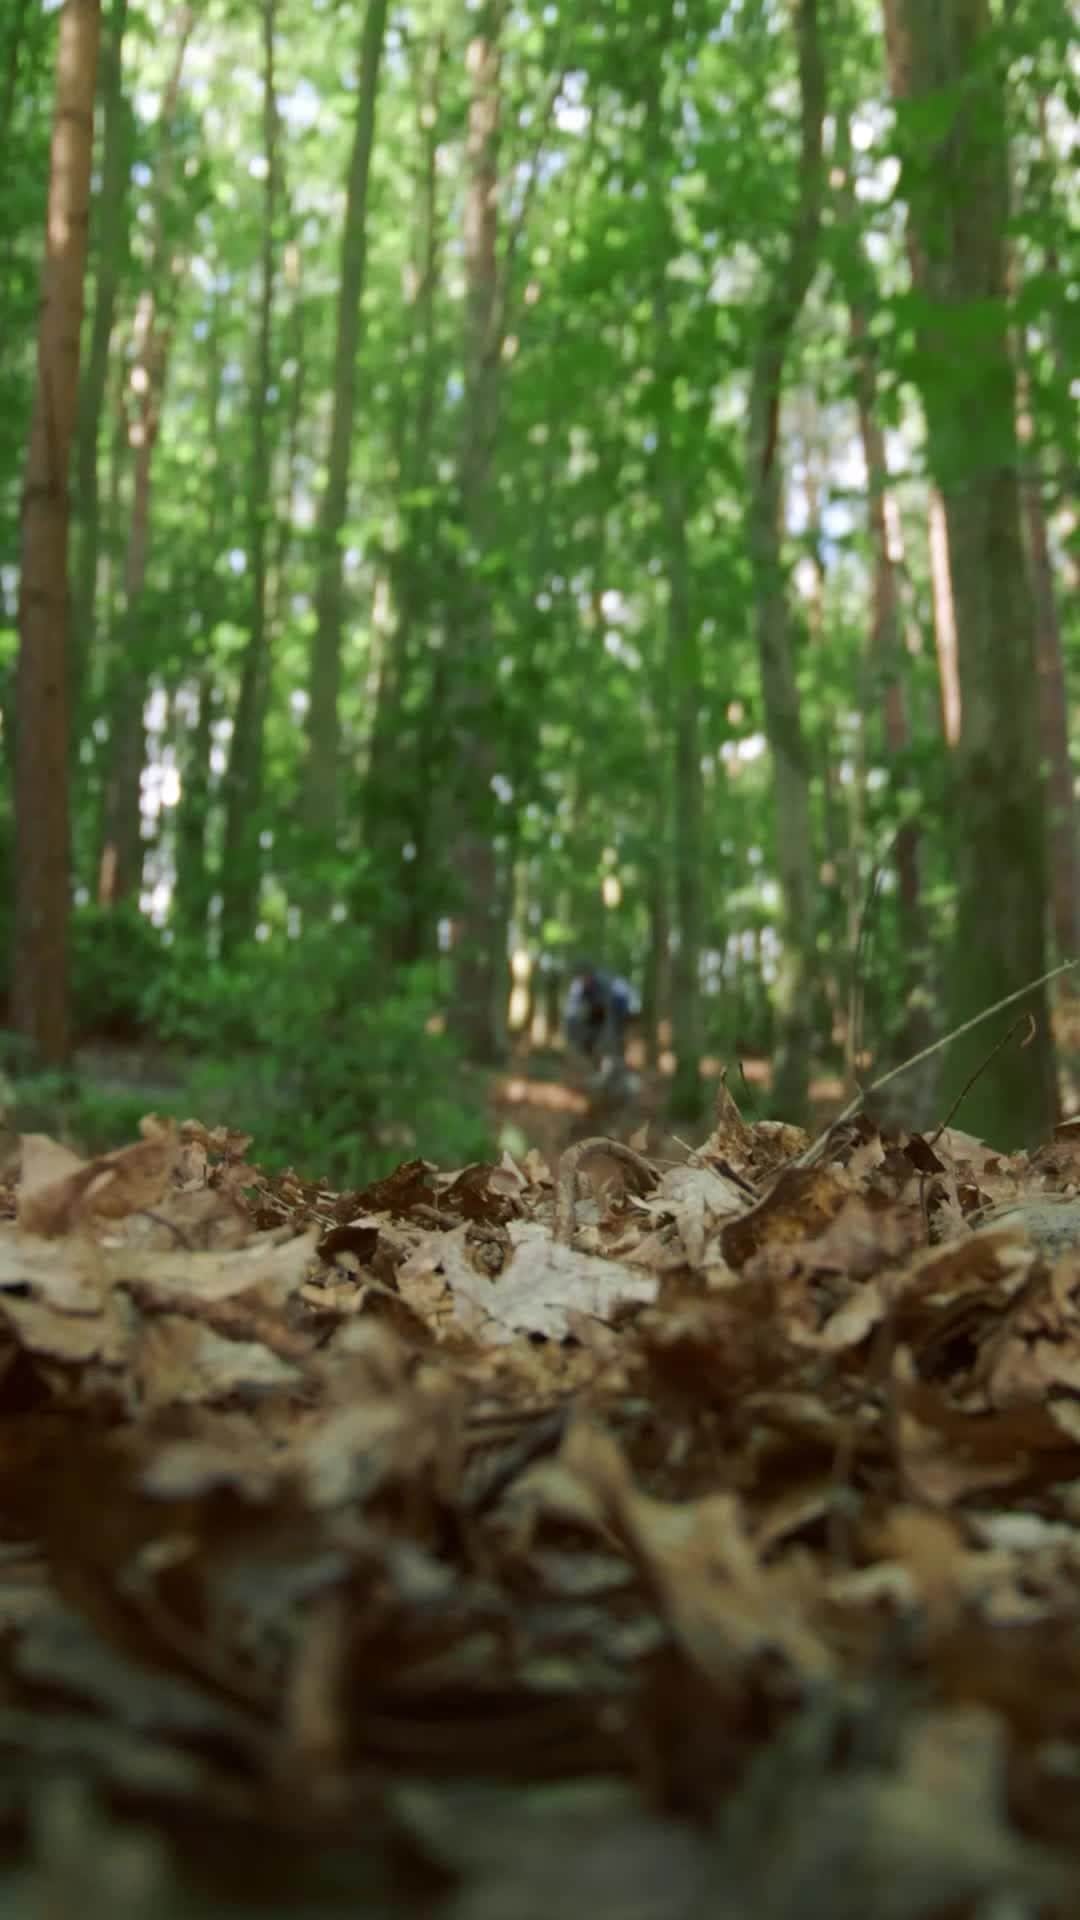 Shimanoのインスタグラム：「Can’t get enough of that magic feeling? Get an exclusive behind-the-scenes peek as @samreynolds26 and his crew turn the world into their MTB playground. Watch them build wild jumps, ridges, branches, and bridges.   🔗 Watch Behind the Scenes at Magic Feeling with @samreynolds26, @tahneeseagrave, @kaosseagrave and @davidmcmillan using the link in bio.   #ShimanoMTB #MakeYourMark #MagicFeeling」